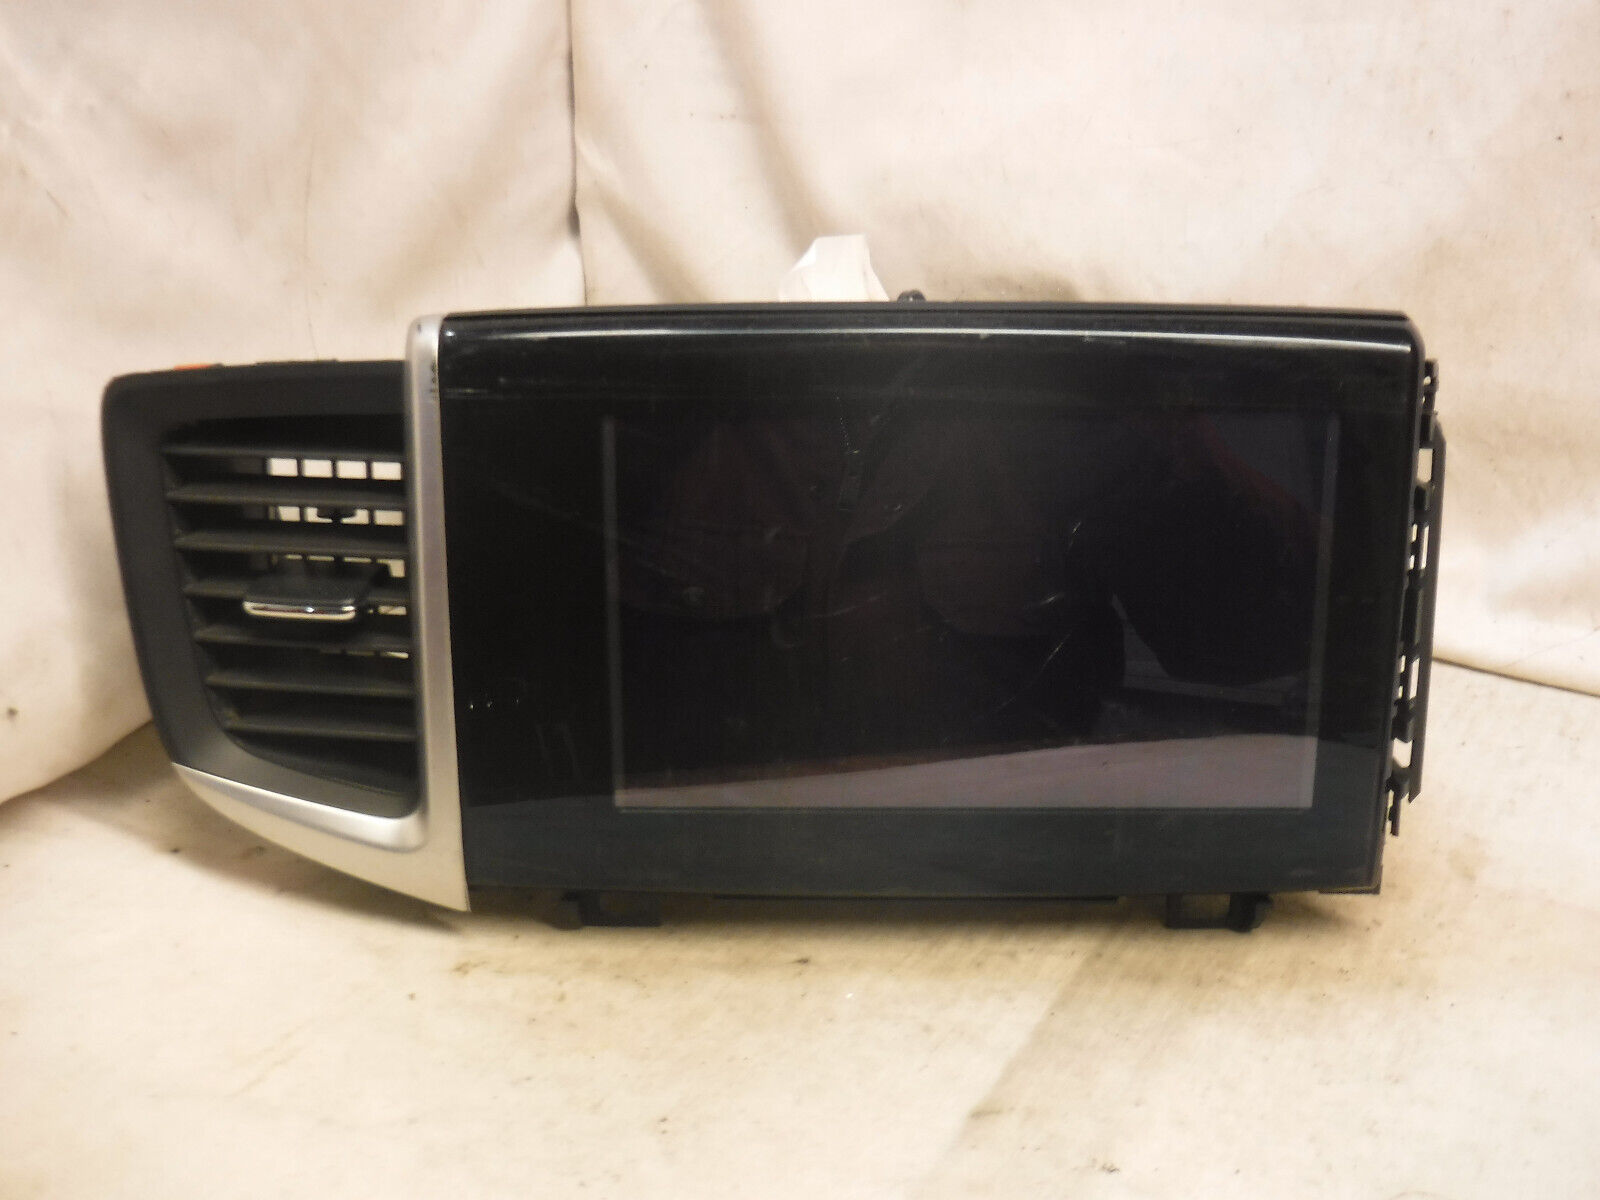 Primary image for 16 17 18 Honda Pilot Display Navigation Screen & Code 39540-TG7-A21 PARTS ONLY